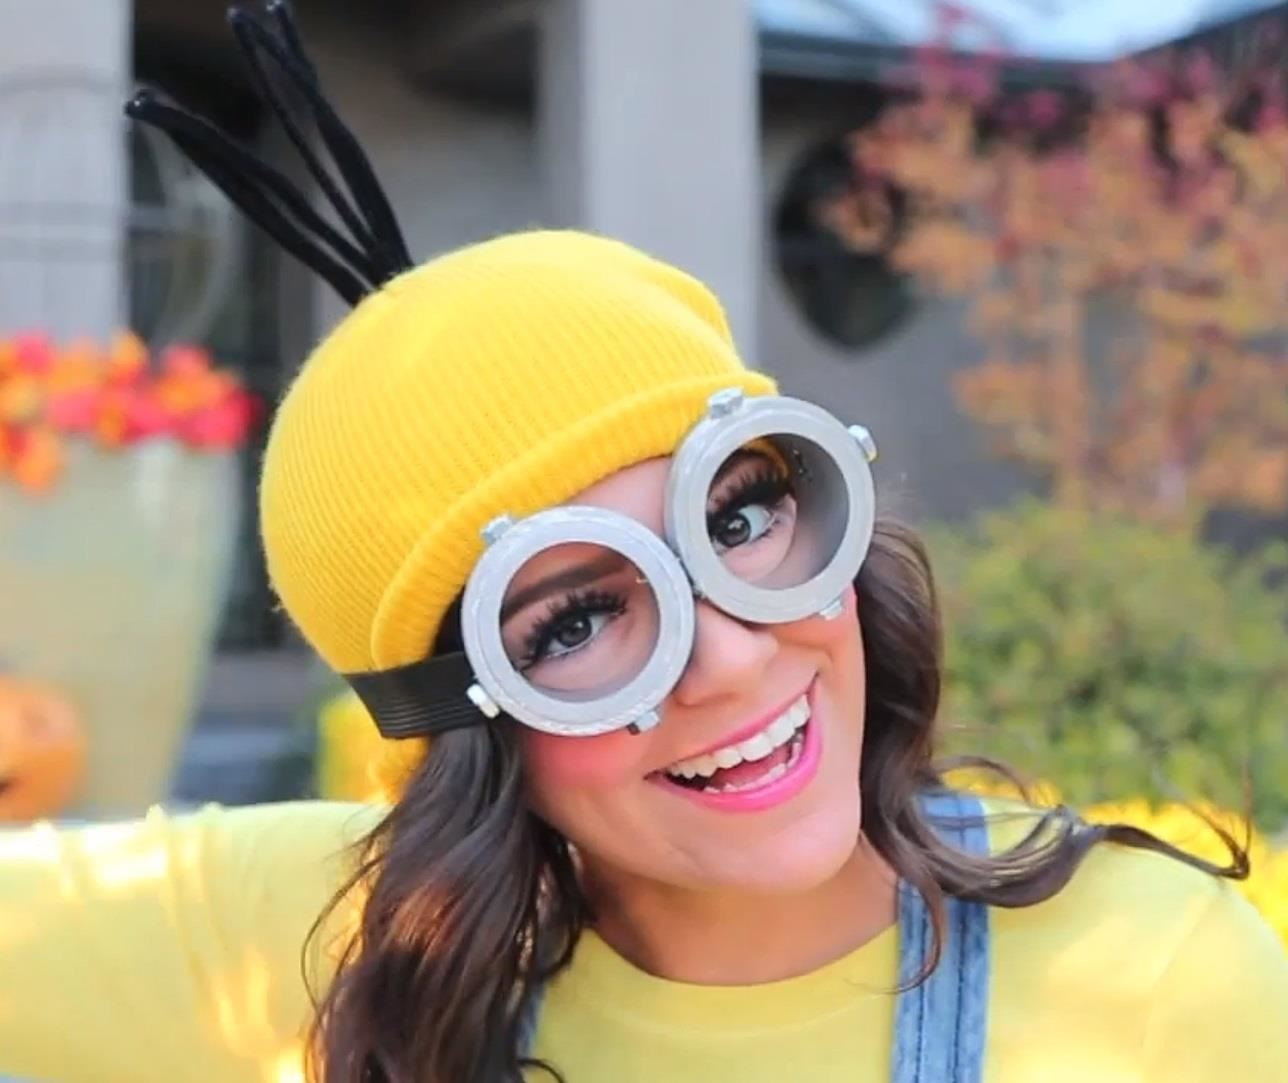 DIY Minion Costume Without Overalls
 Bee Do Bee Do 5 Awesome DIY Minion Halloween Costumes